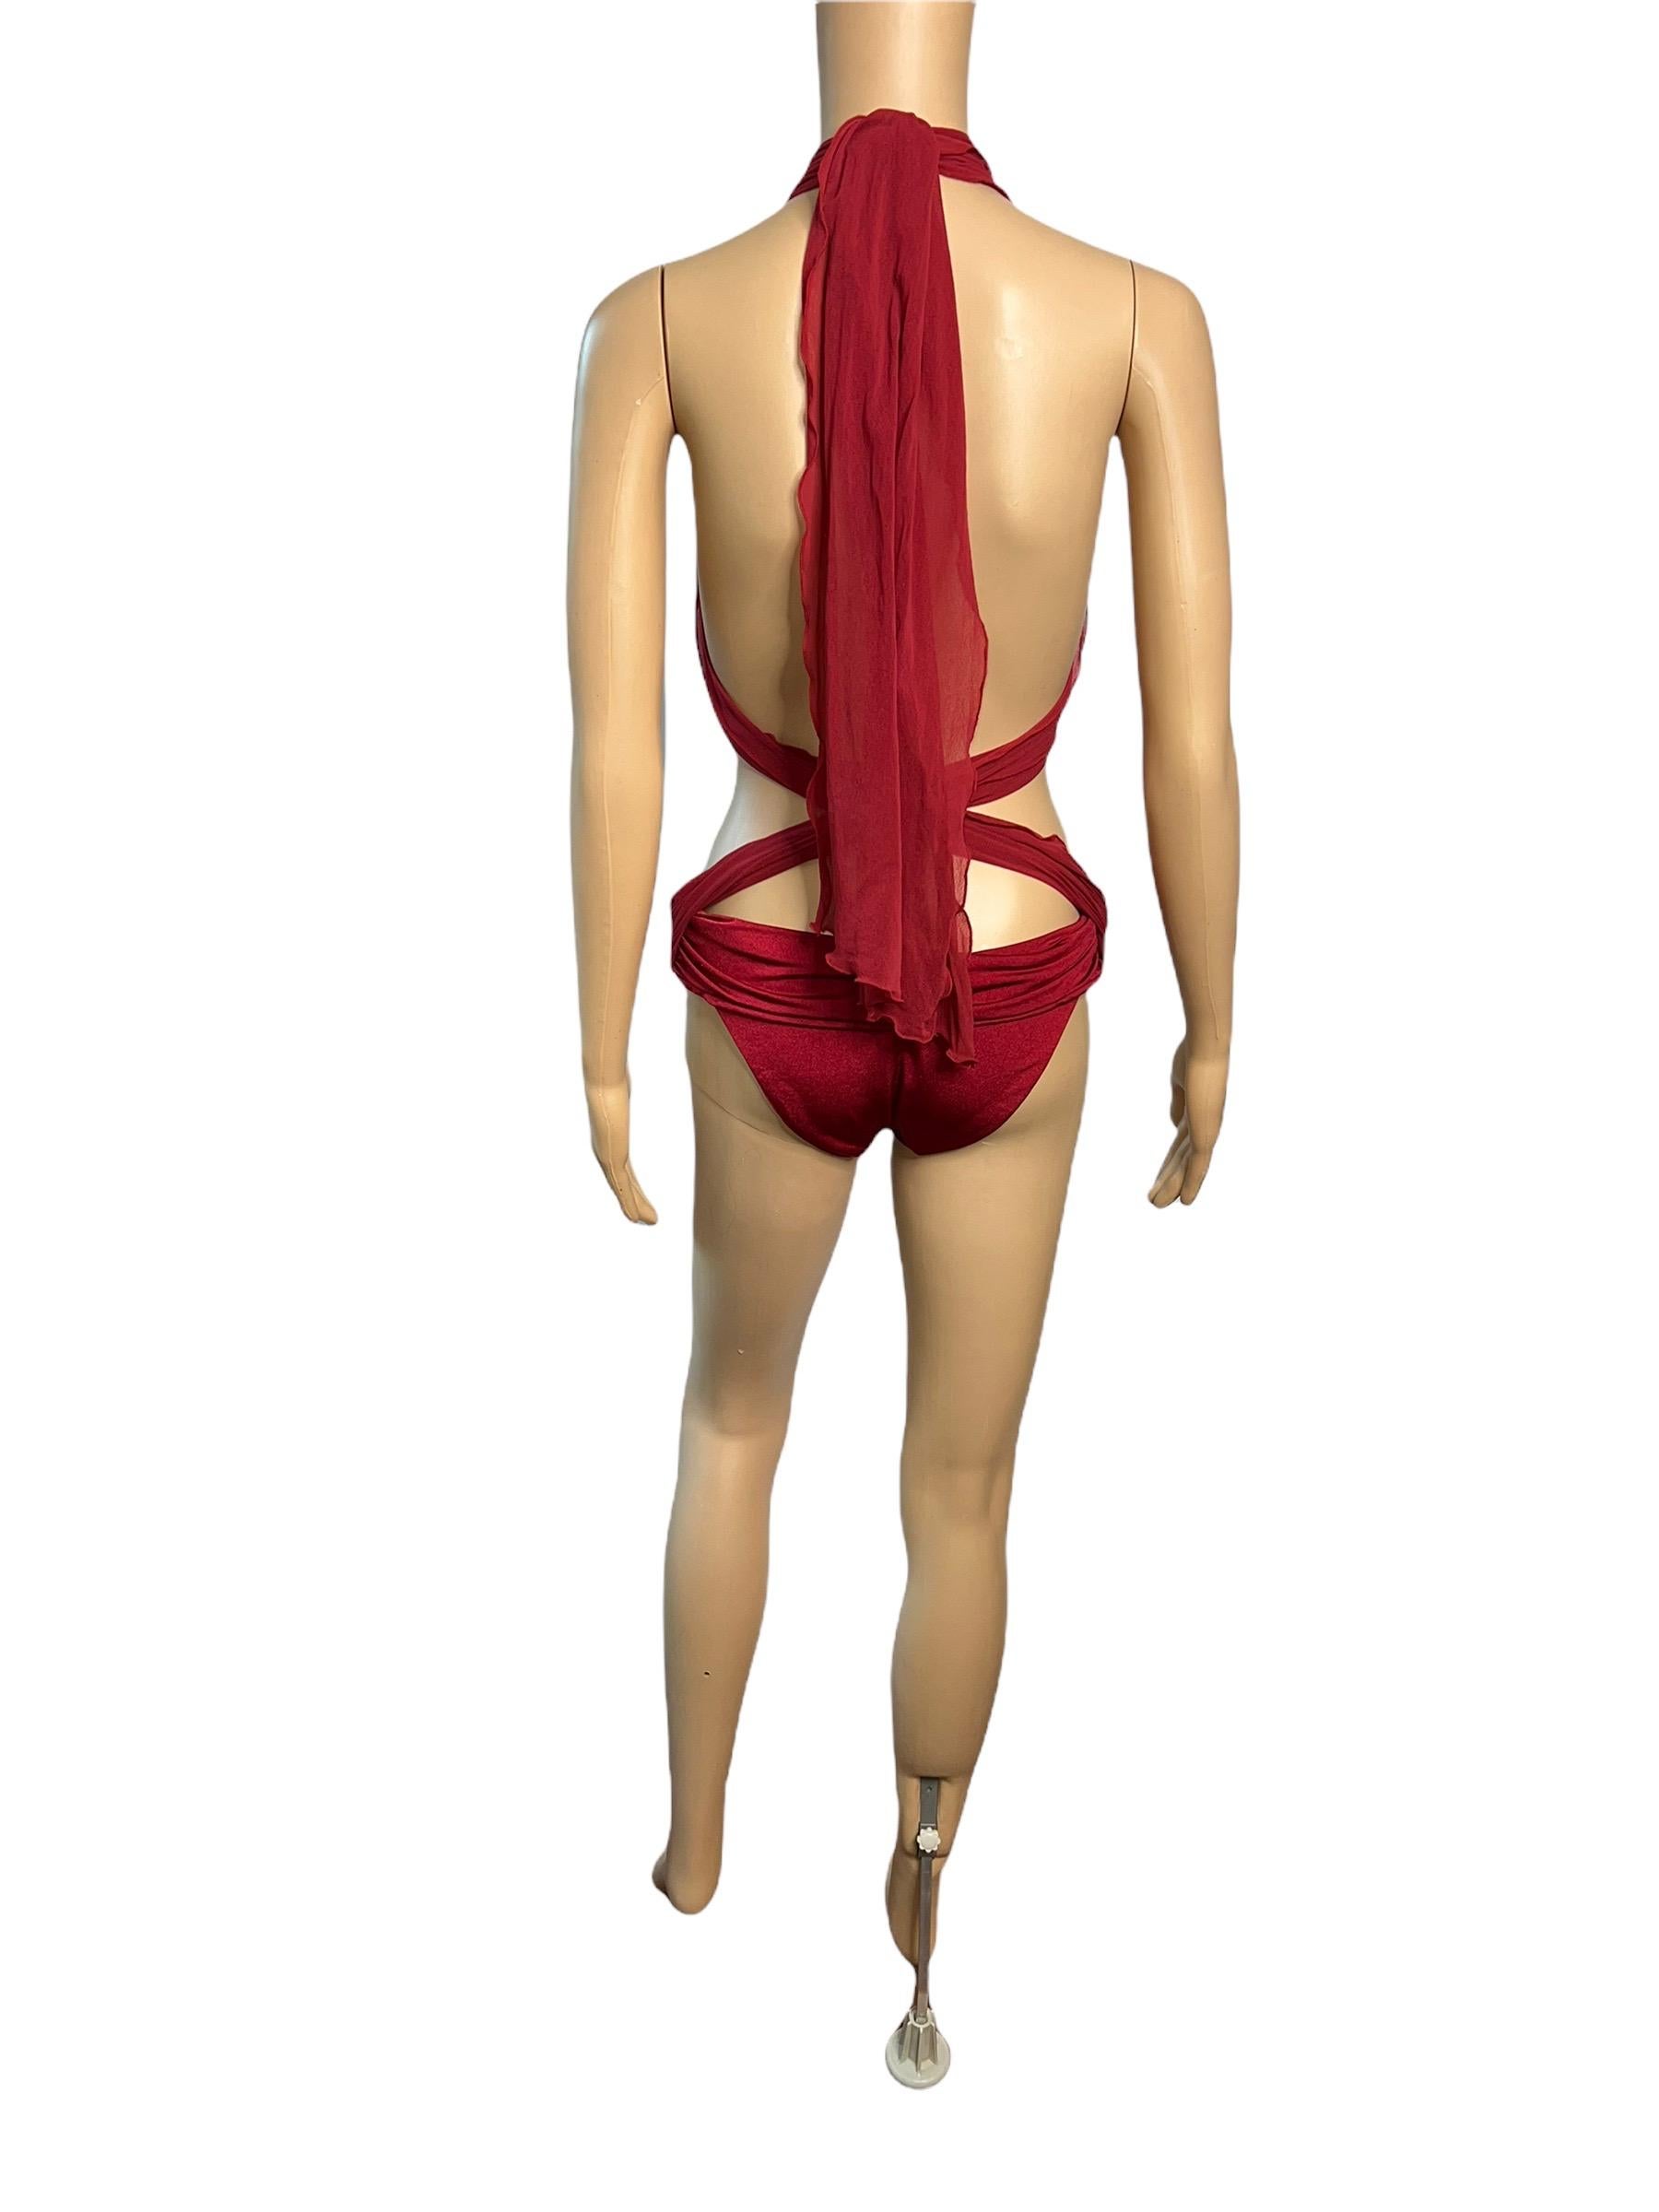 Tom Ford for Gucci S/S 2001 Runway Sheer One Piece Bodysuit Swimsuit Swimwear Size L 

Look 35 from the Spring 2001 Collection

Please note this swimsuit can be styled a few different ways based on preference as seen in the photos.

